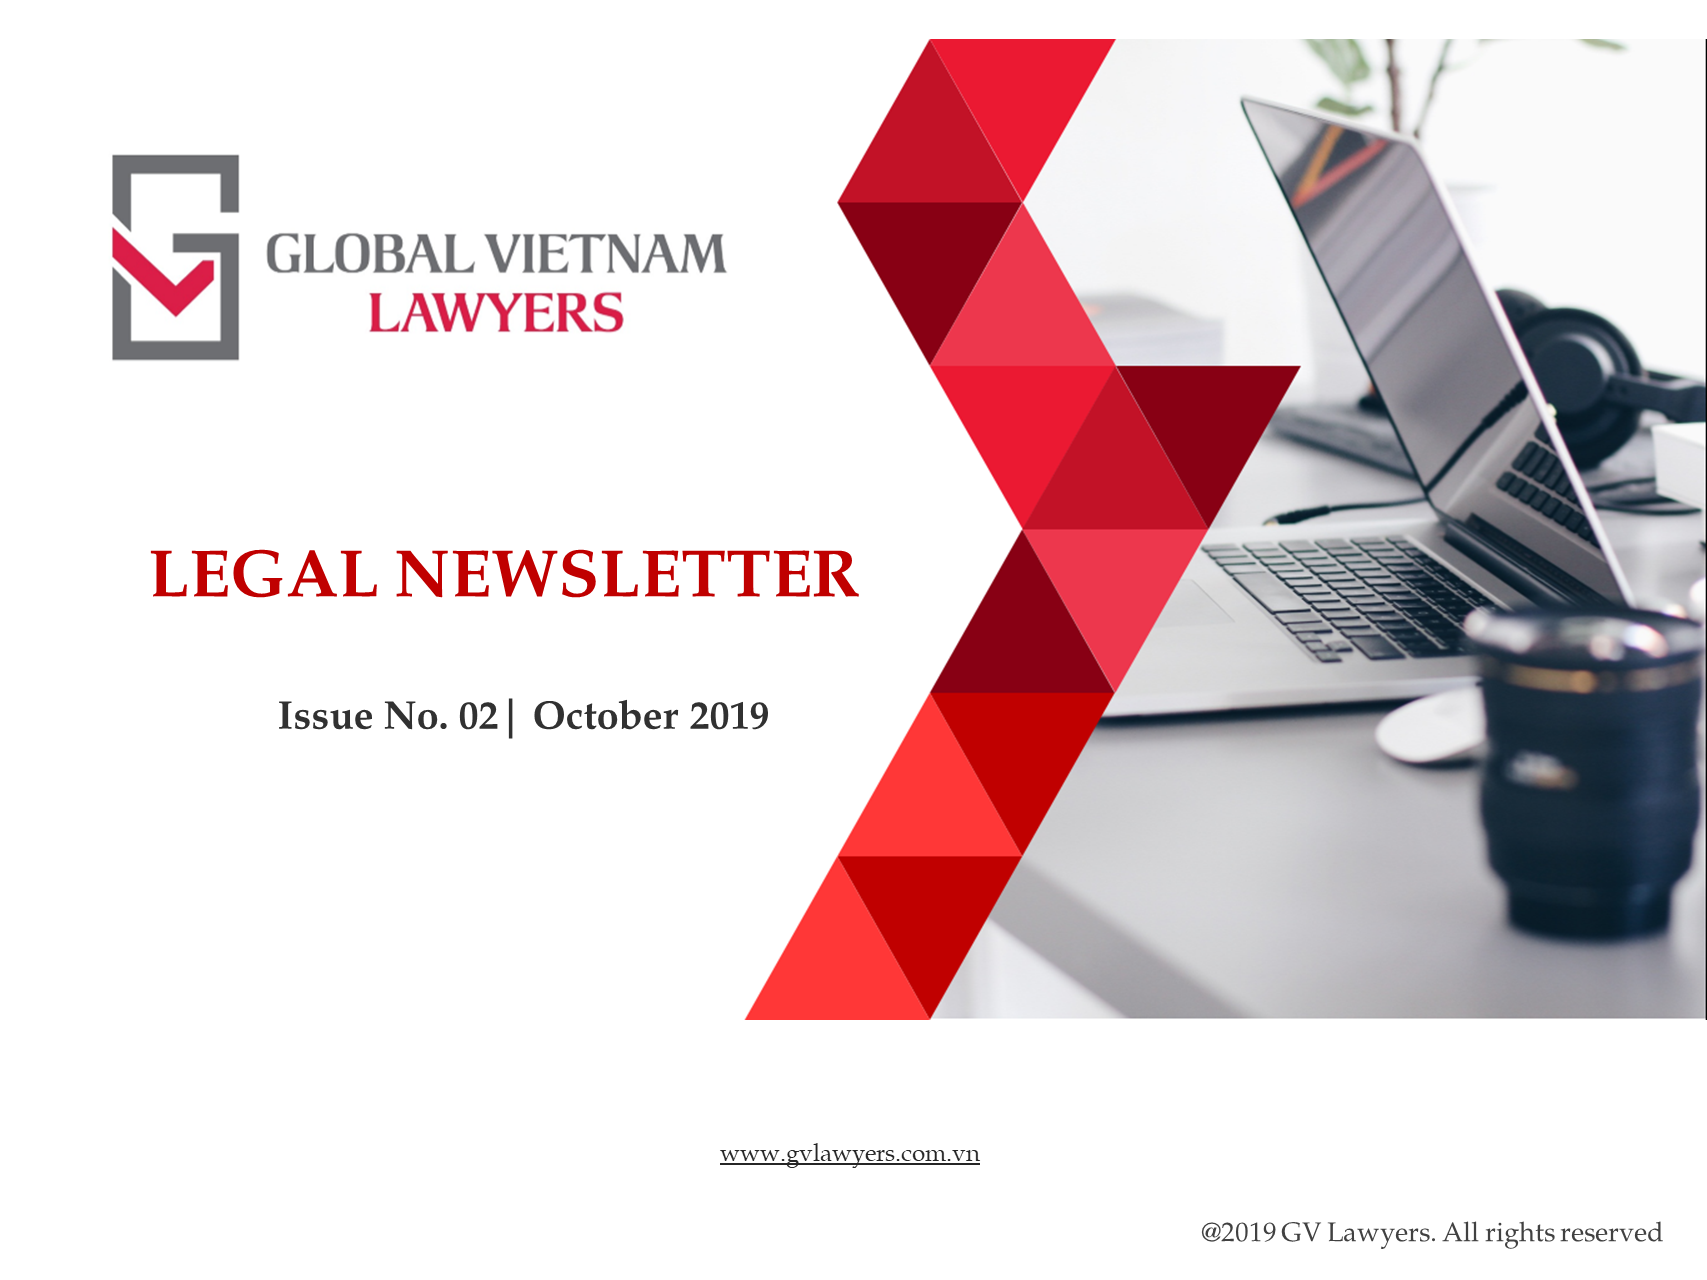 ENLegal Newsletter IssueNo2 Oct2019 GVLawyers 1